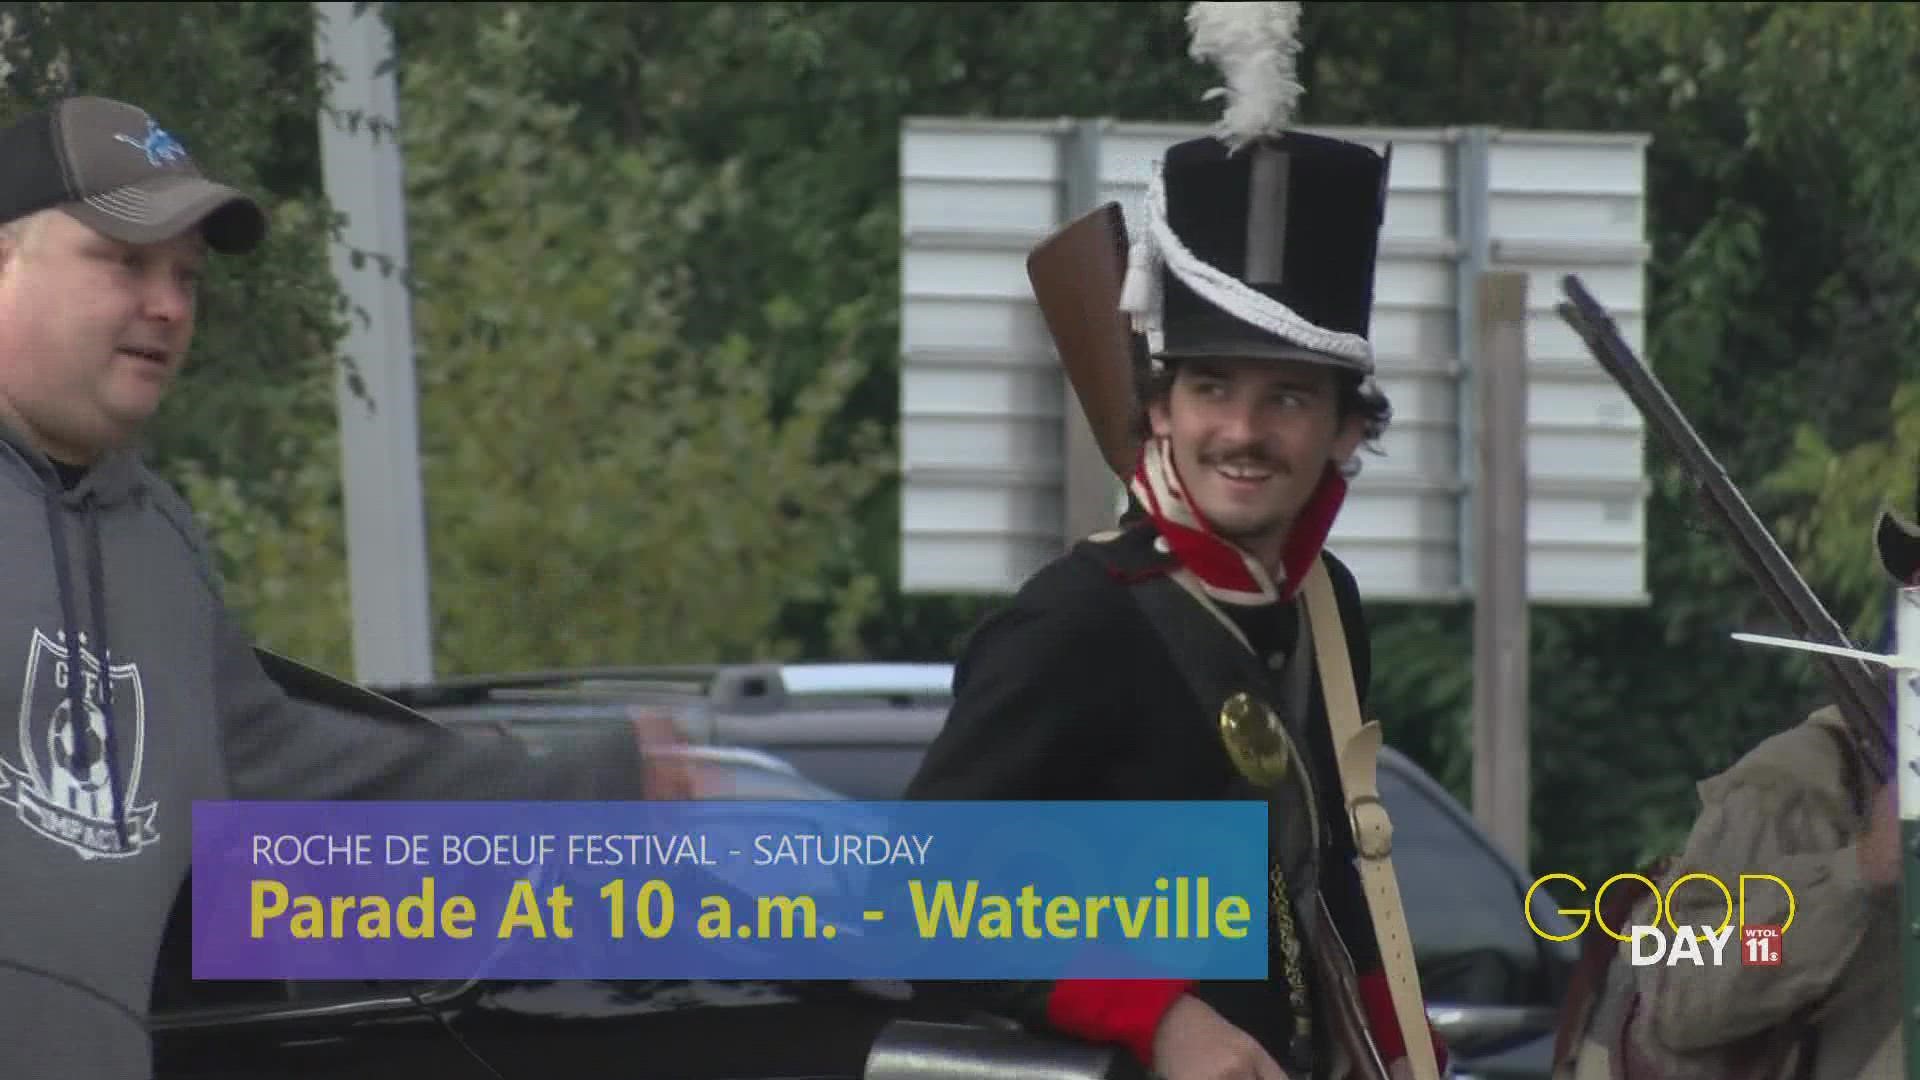 A parade, reenactments, music and more: the beloved Waterville festival kicks off on Saturday at 10 a.m.